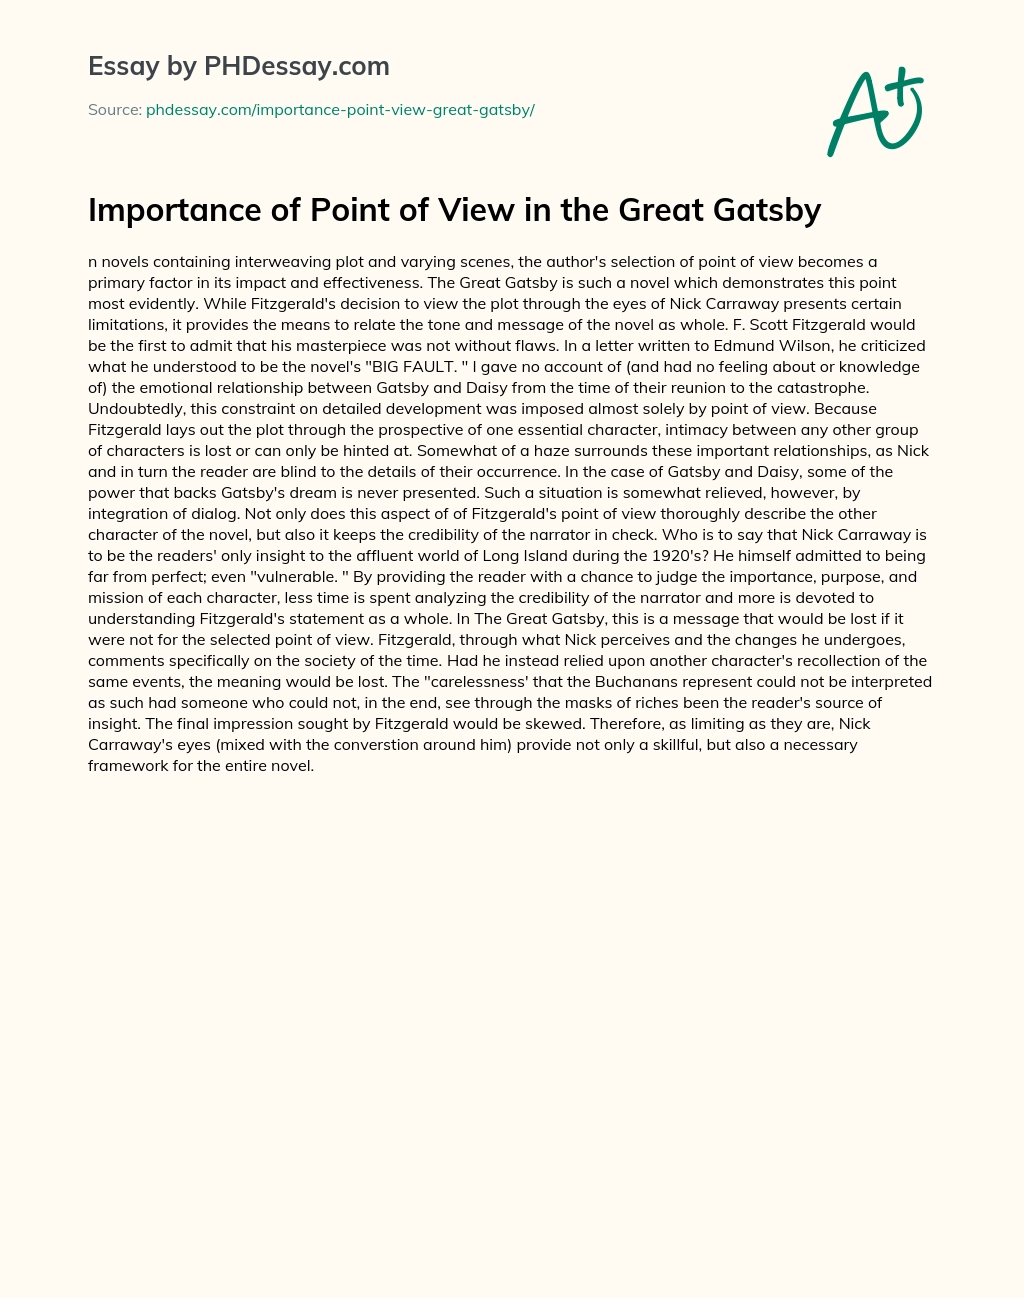 Importance of Point of View in the Great Gatsby essay